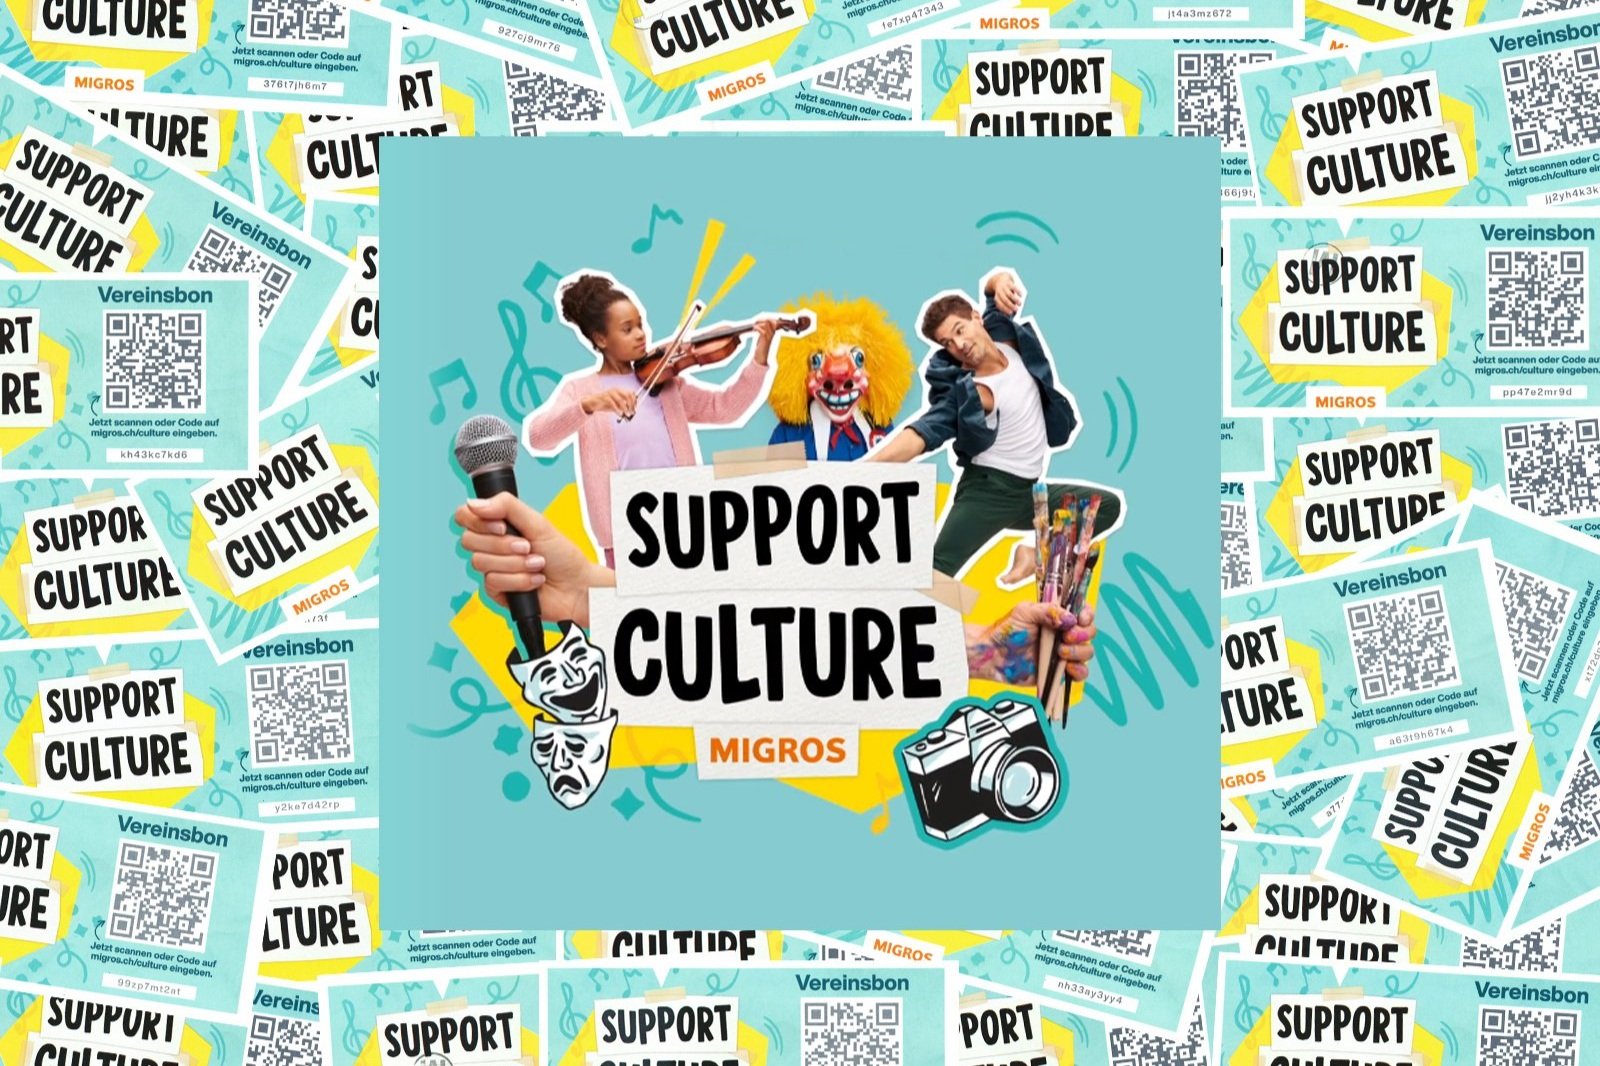 Migros+Support+Culture+01.jpg